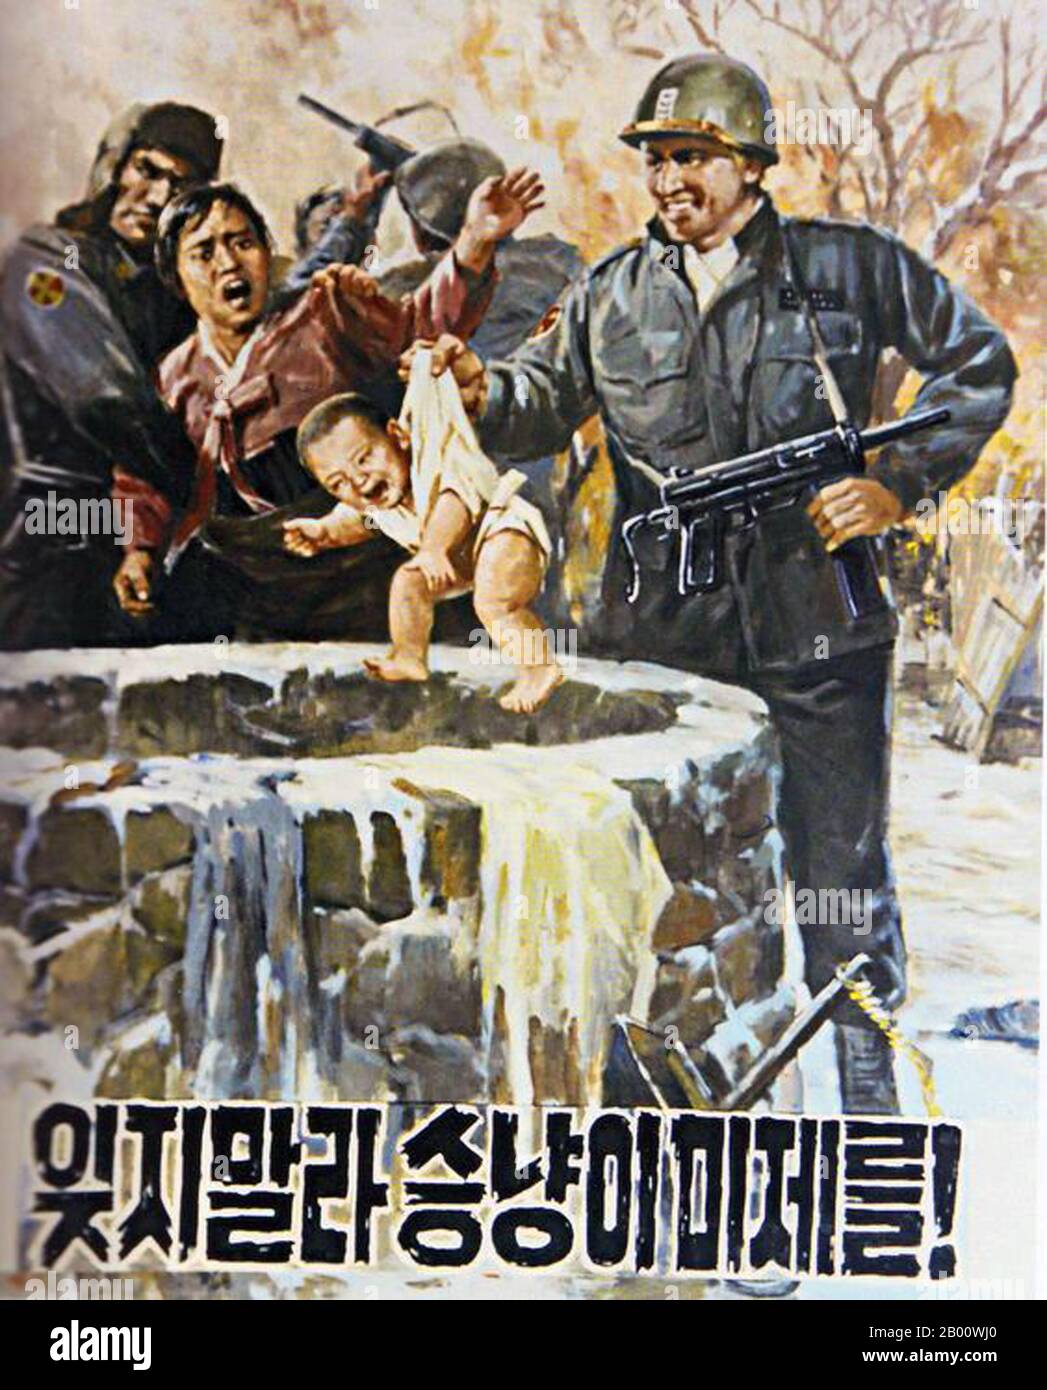 Korea: North Korean (DPRK) propaganda poster: Never forget the Crimes of the American Imperialists!  Socialist realism is a style of realistic art which developed under Socialism in the Soviet Union and became a dominant style in other communist countries. Socialist realism is a teleologically-oriented style having as its purpose the furtherance of the goals of socialism and communism. Although related, it should not be confused with Social realism, a type of art that realistically depicts subjects of social concern. Stock Photo